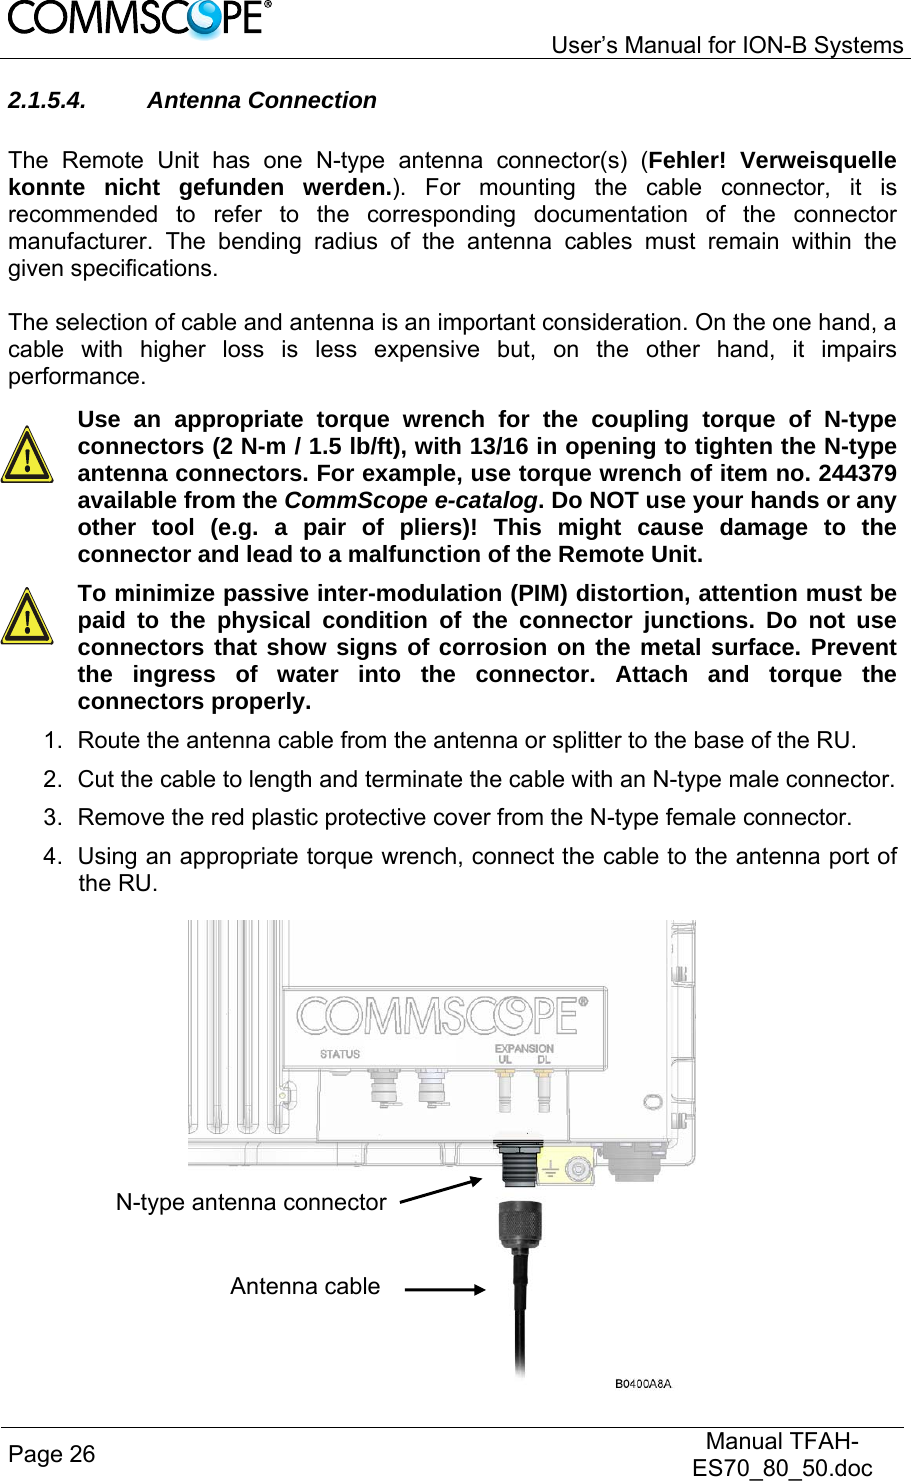   User’s Manual for ION-B Systems Page 26   Manual TFAH-ES70_80_50.doc  2.1.5.4. Antenna Connection  The Remote Unit has one N-type antenna connector(s) (Fehler! Verweisquelle konnte nicht gefunden werden.). For mounting the cable connector, it is recommended to refer to the corresponding documentation of the connector manufacturer. The bending radius of the antenna cables must remain within the given specifications.   The selection of cable and antenna is an important consideration. On the one hand, a cable with higher loss is less expensive but, on the other hand, it impairs performance.  Use an appropriate torque wrench for the coupling torque of N-type connectors (2 N-m / 1.5 lb/ft), with 13/16 in opening to tighten the N-type antenna connectors. For example, use torque wrench of item no. 244379 available from the CommScope e-catalog. Do NOT use your hands or any other tool (e.g. a pair of pliers)! This might cause damage to the connector and lead to a malfunction of the Remote Unit.  To minimize passive inter-modulation (PIM) distortion, attention must be paid to the physical condition of the connector junctions. Do not use connectors that show signs of corrosion on the metal surface. Prevent the ingress of water into the connector. Attach and torque the connectors properly. 1.  Route the antenna cable from the antenna or splitter to the base of the RU. 2.  Cut the cable to length and terminate the cable with an N-type male connector. 3.  Remove the red plastic protective cover from the N-type female connector. 4.  Using an appropriate torque wrench, connect the cable to the antenna port of the RU.  N-type antenna connector Antenna cable 